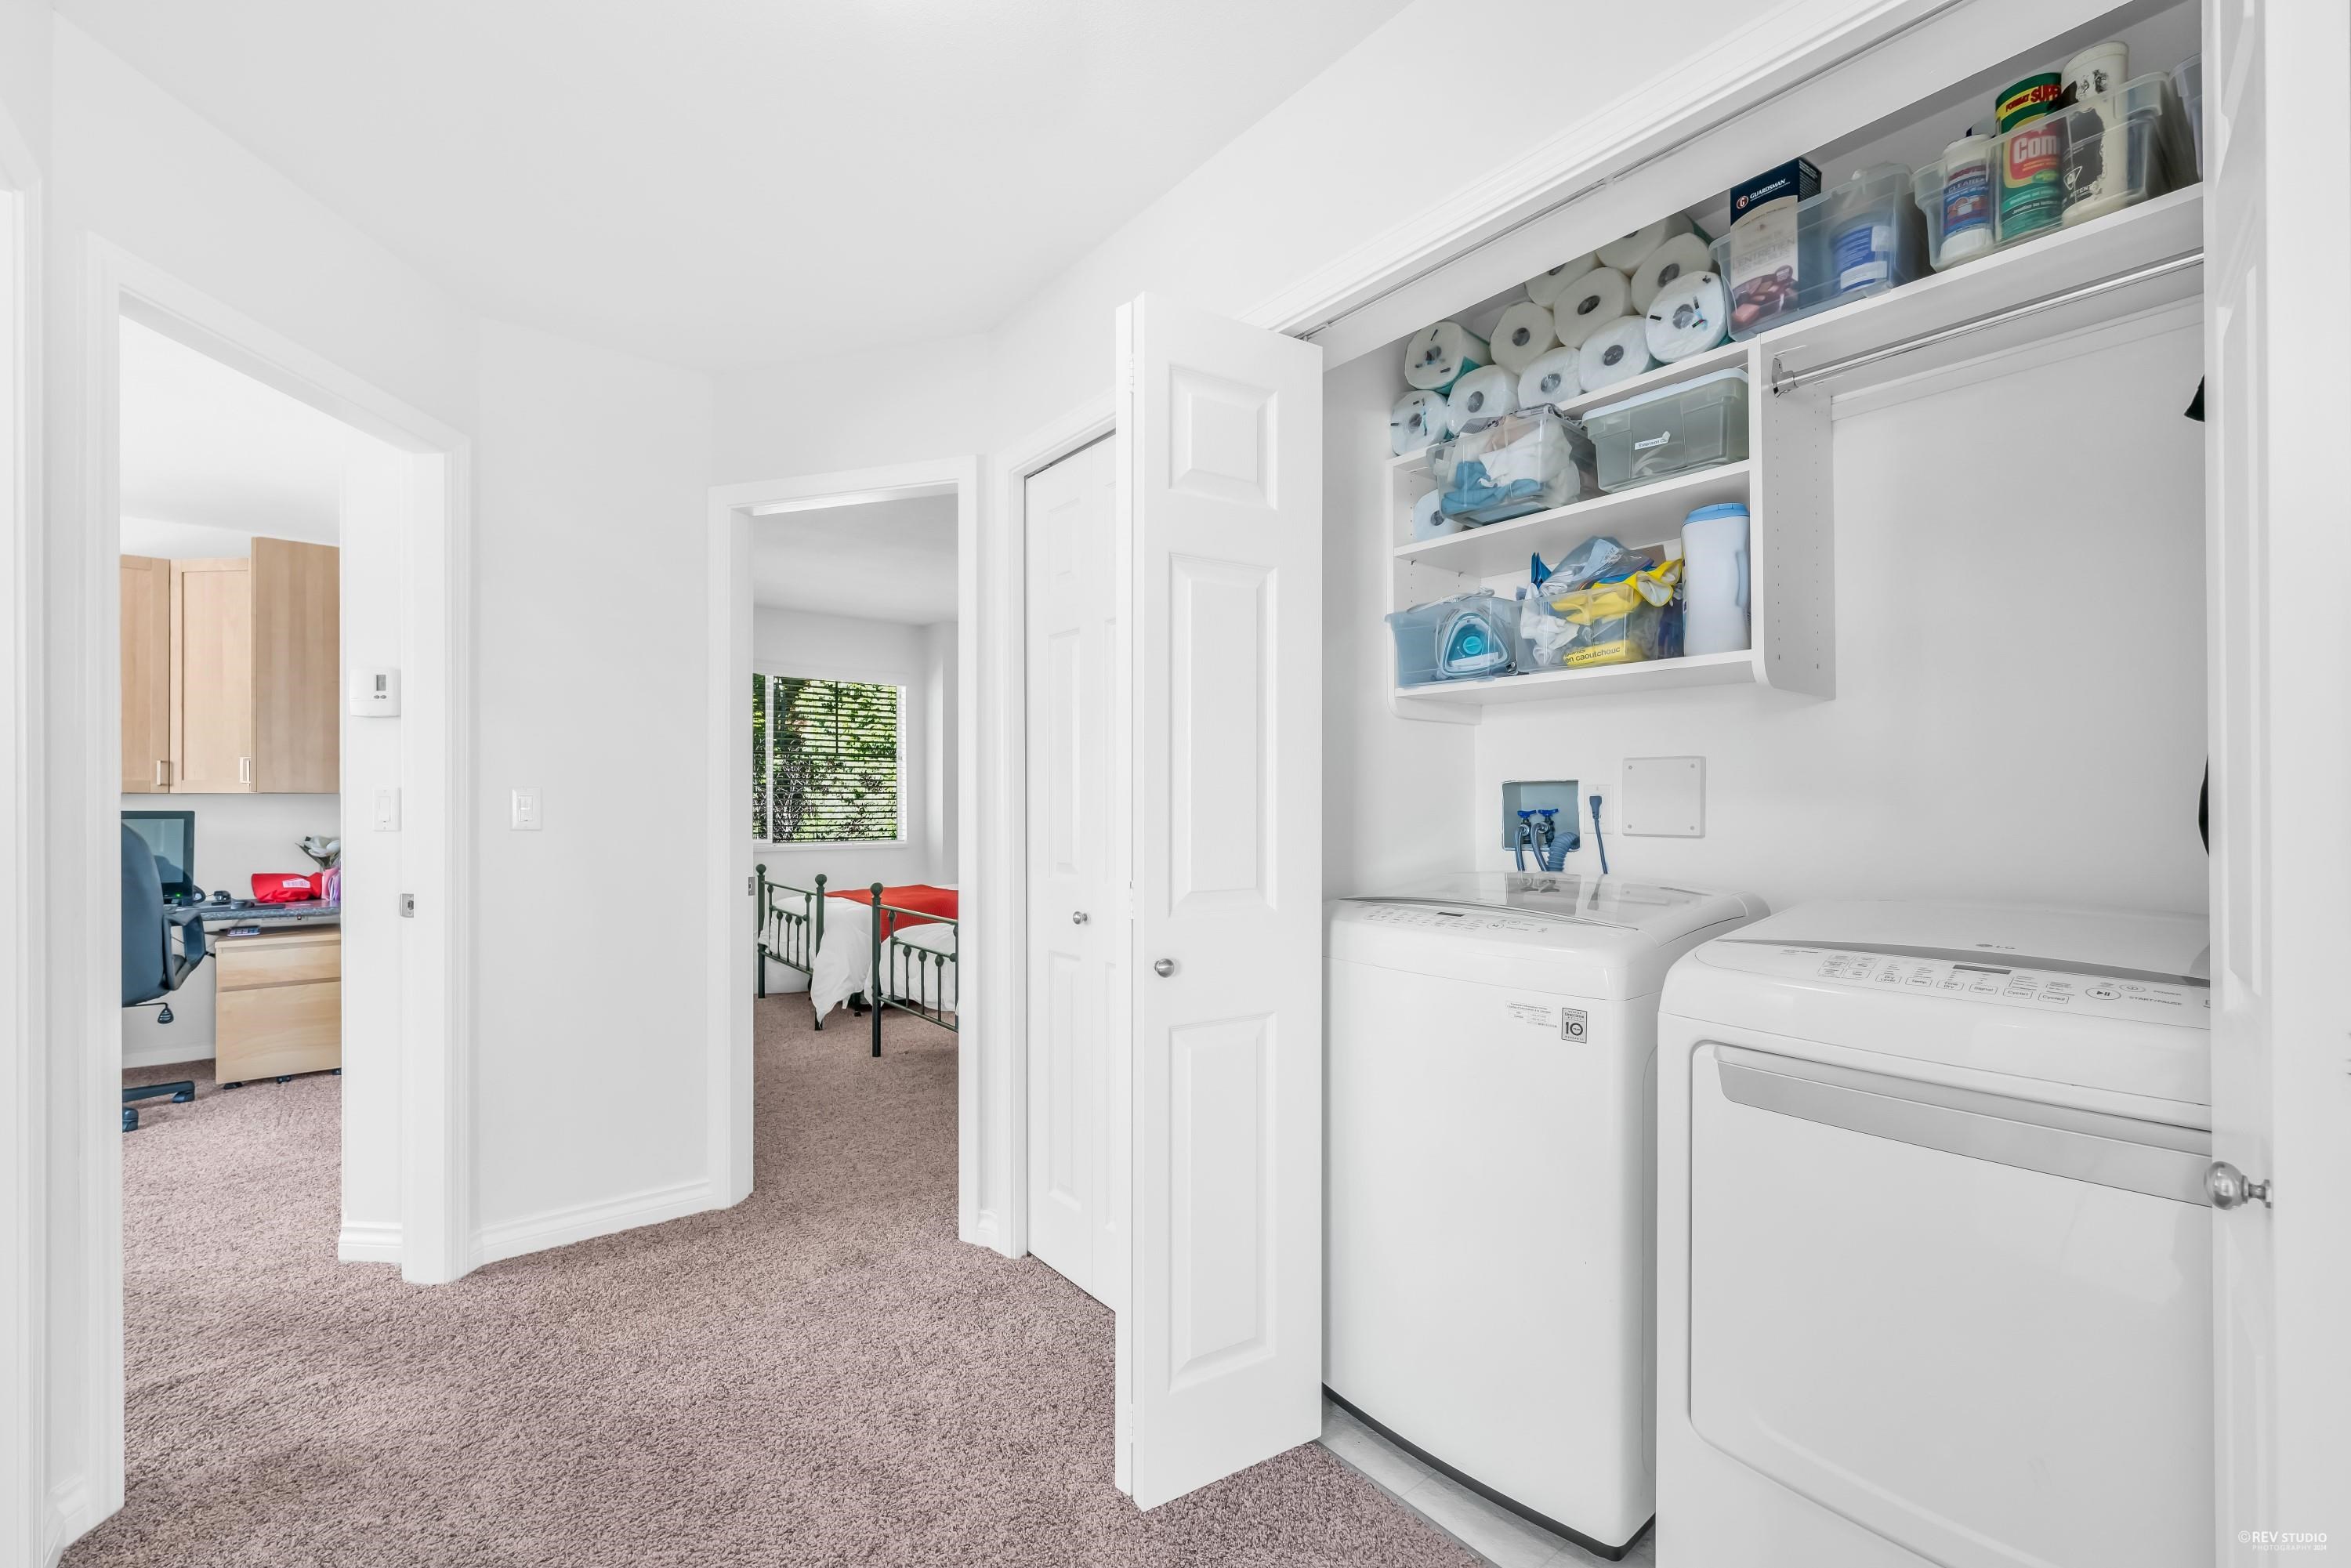 Full size washer & dryer conveniently & discreetly located on the upper floor.